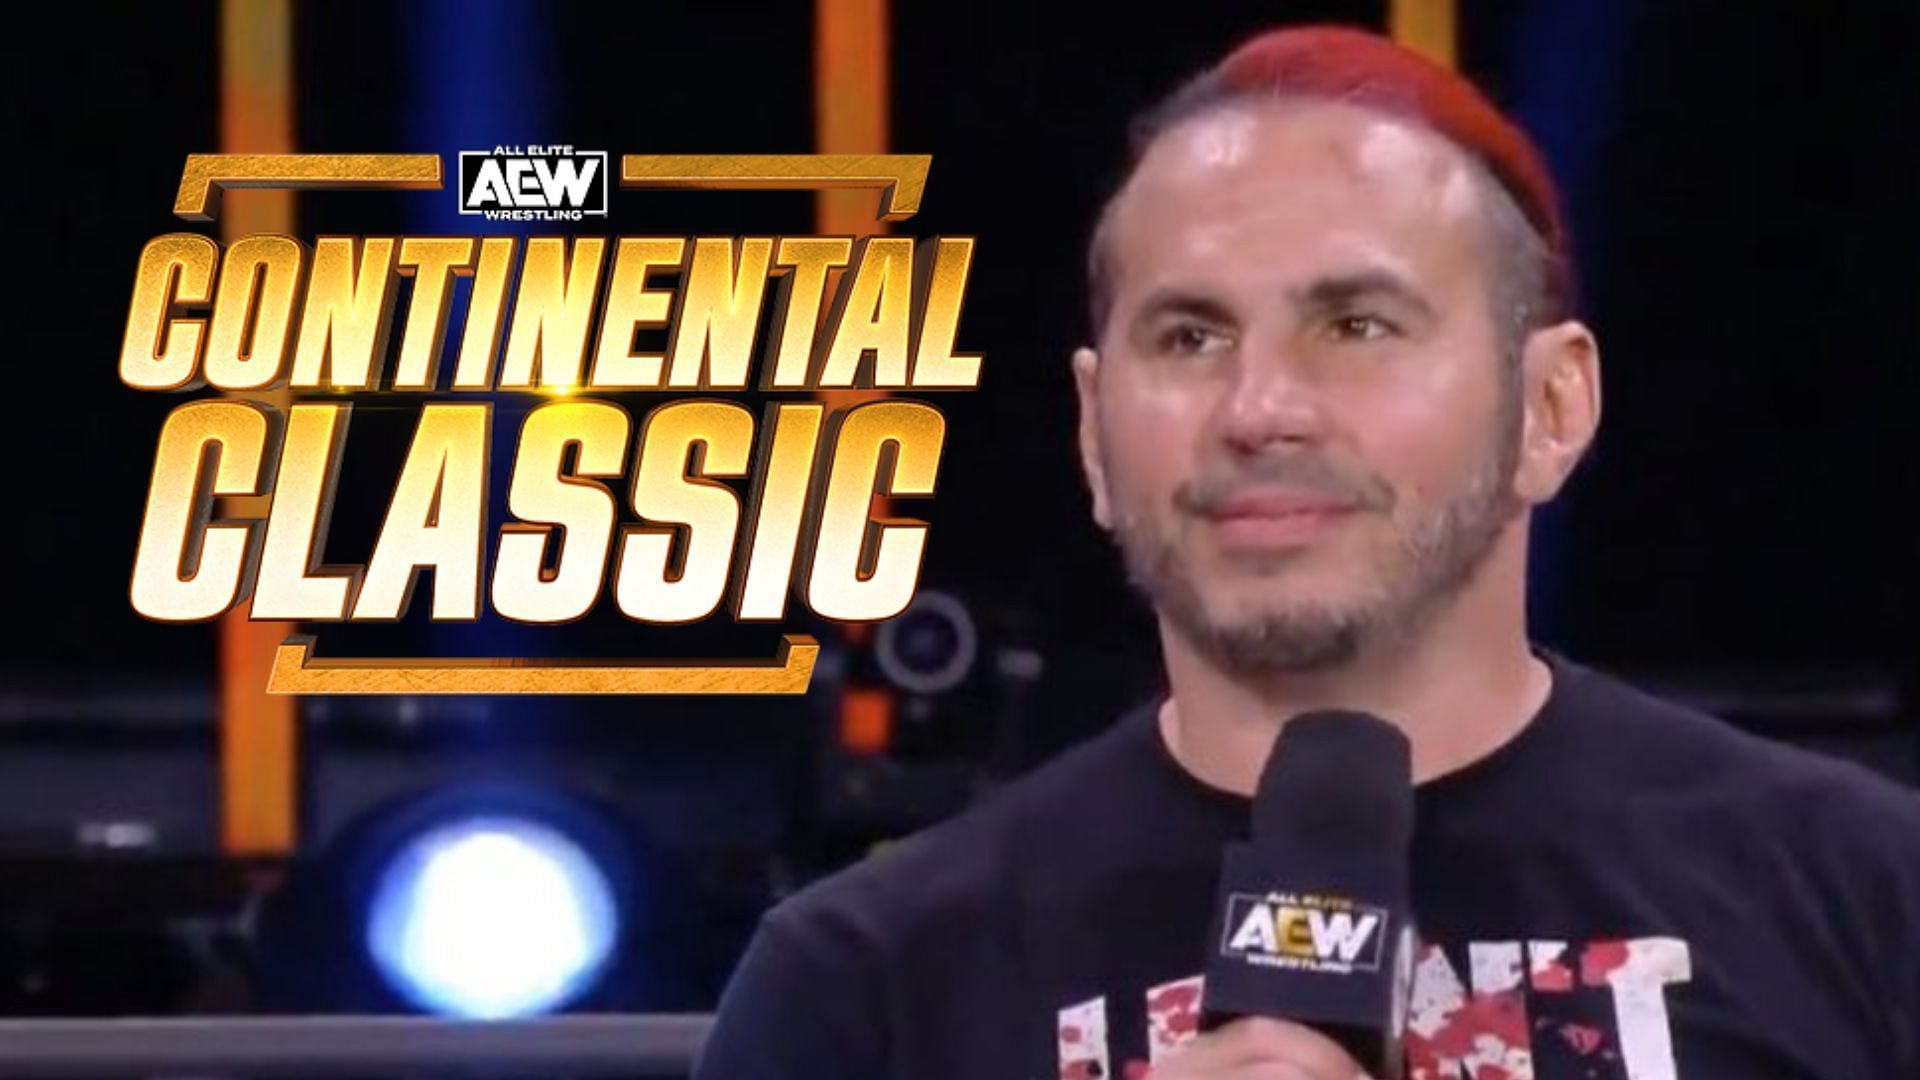 Matt Hardy comments on the Continental Classic and its participants.